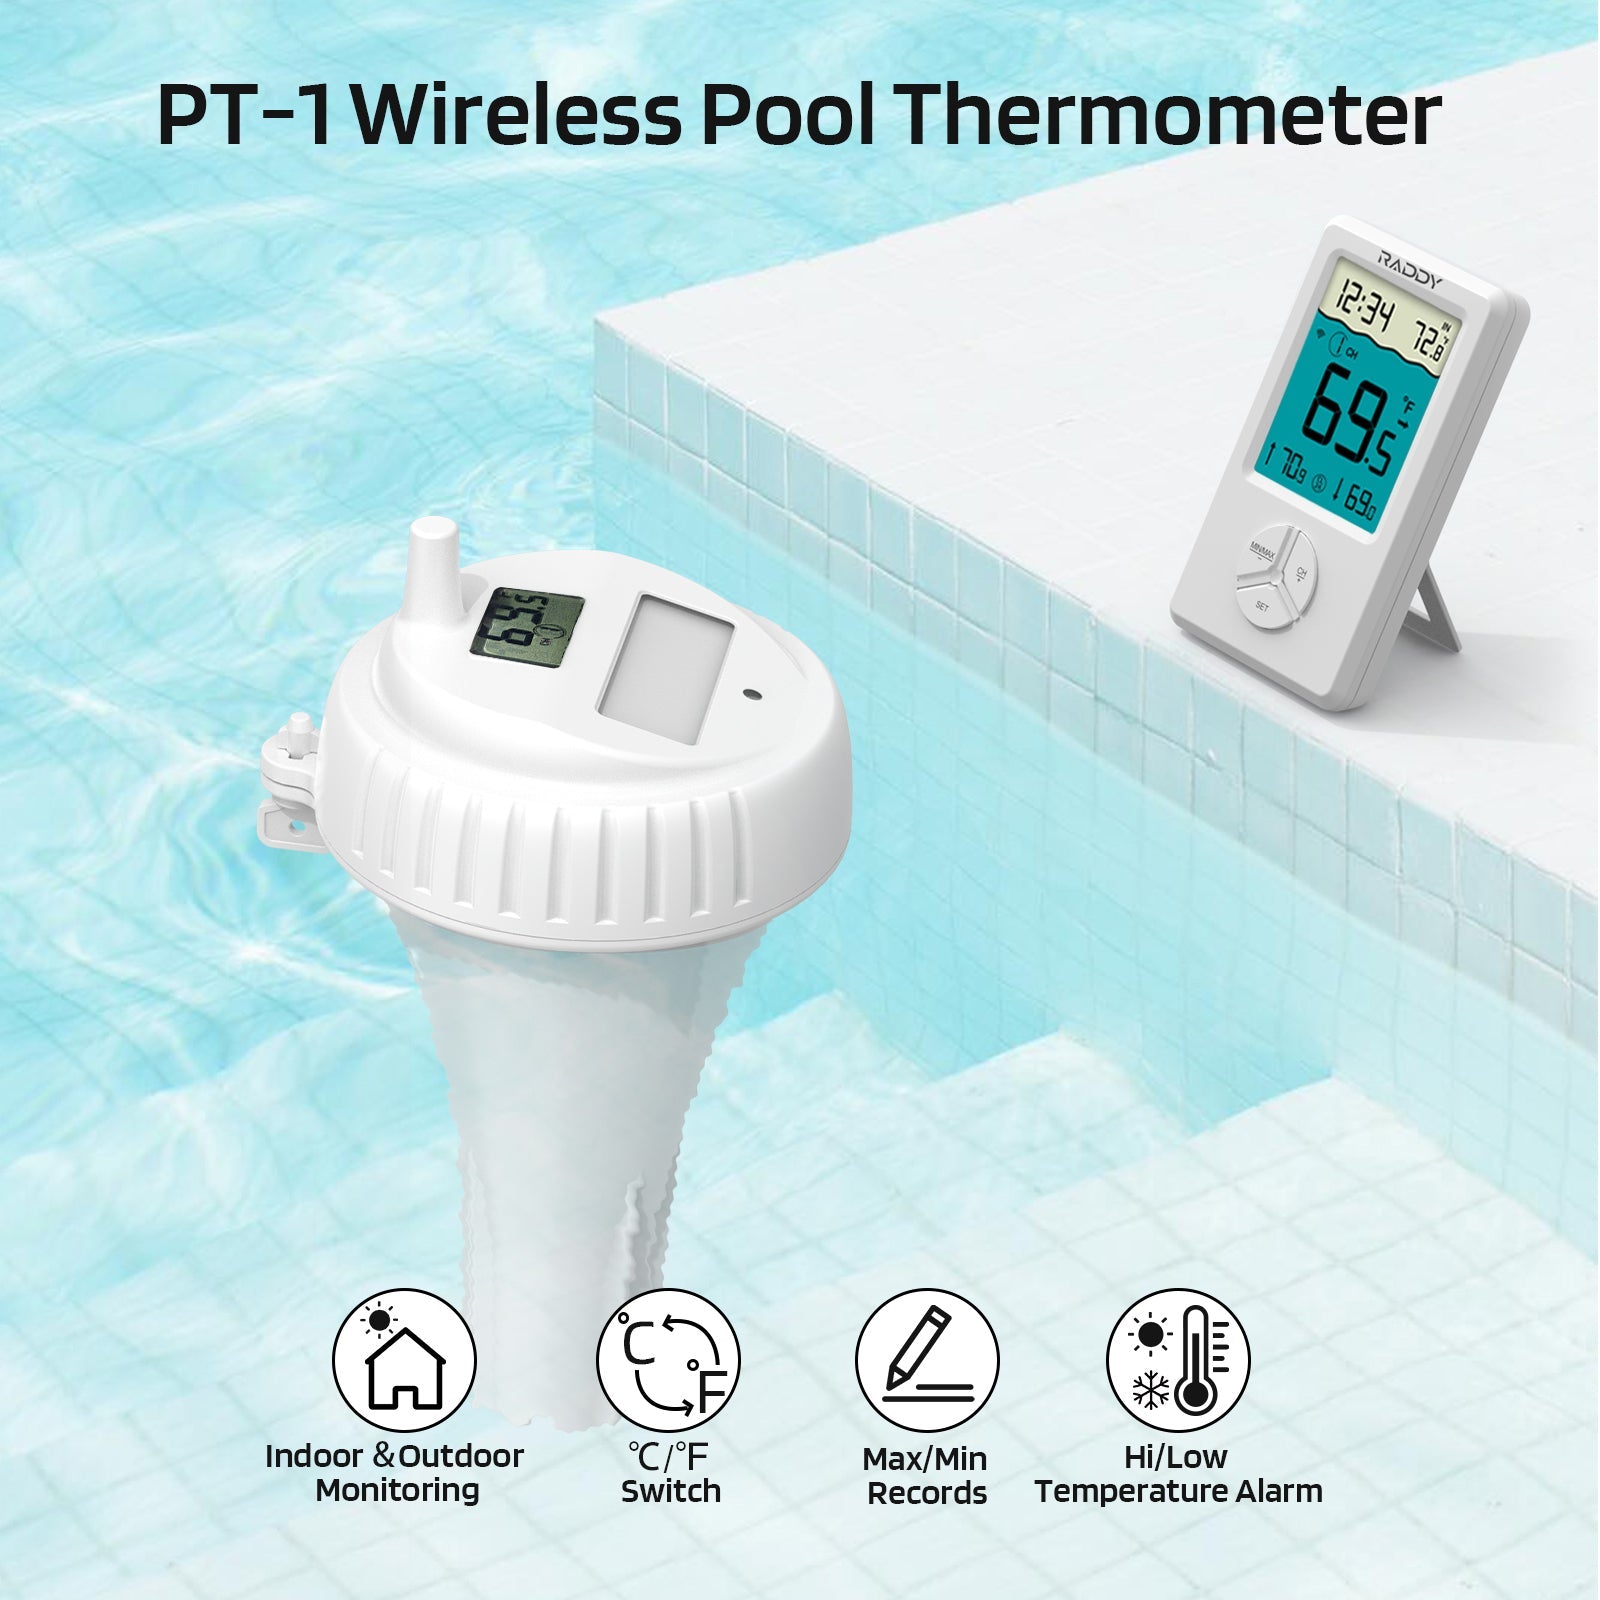 PT-1 Wireless Pool Thermometer – Raddy